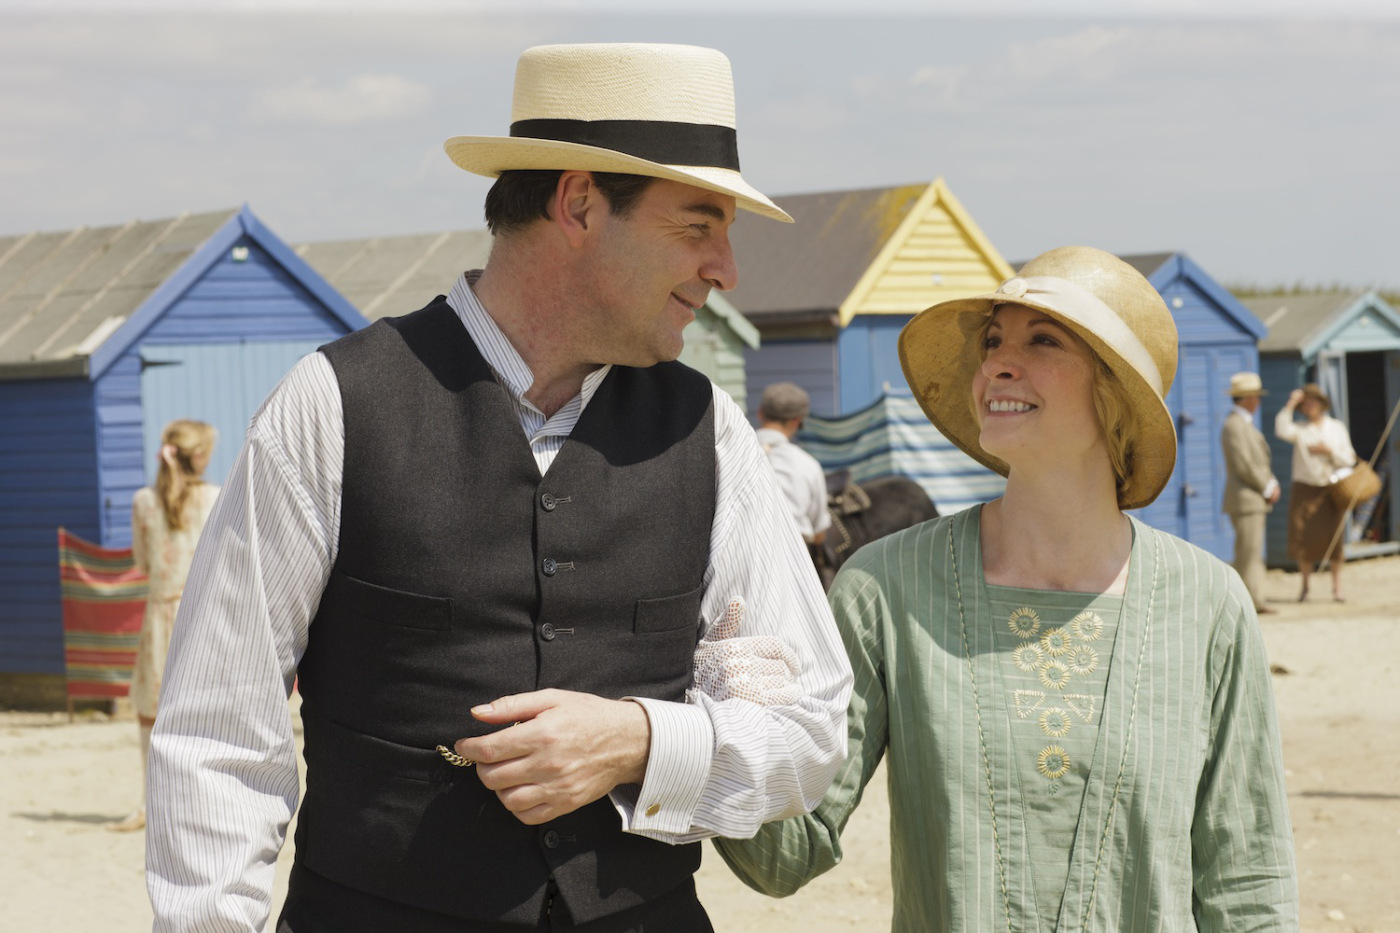 From left to right: Brendan Coyle as Mr. Bates and Joanne Froggatt as Anna Bates